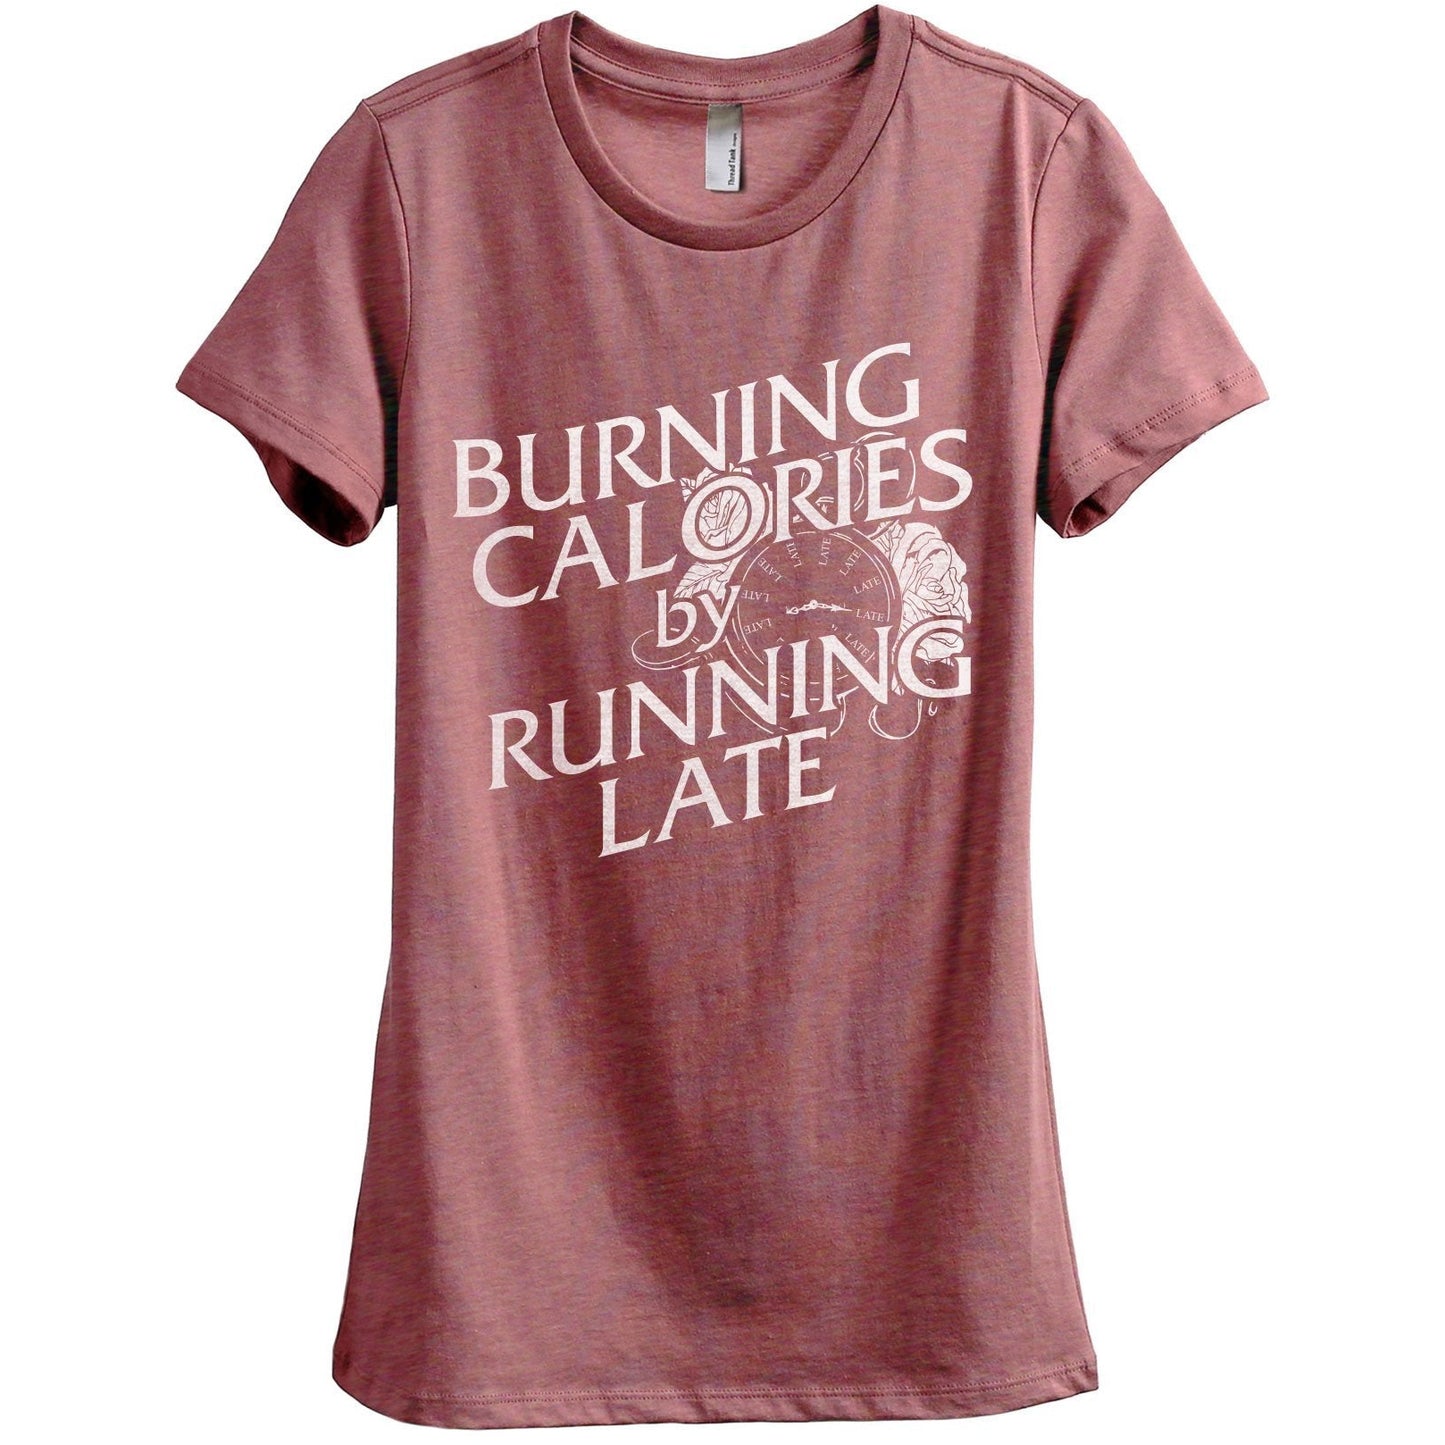 Burning Calories By Running Late Women's Relaxed Crewneck T-Shirt Top Tee Heather Rouge